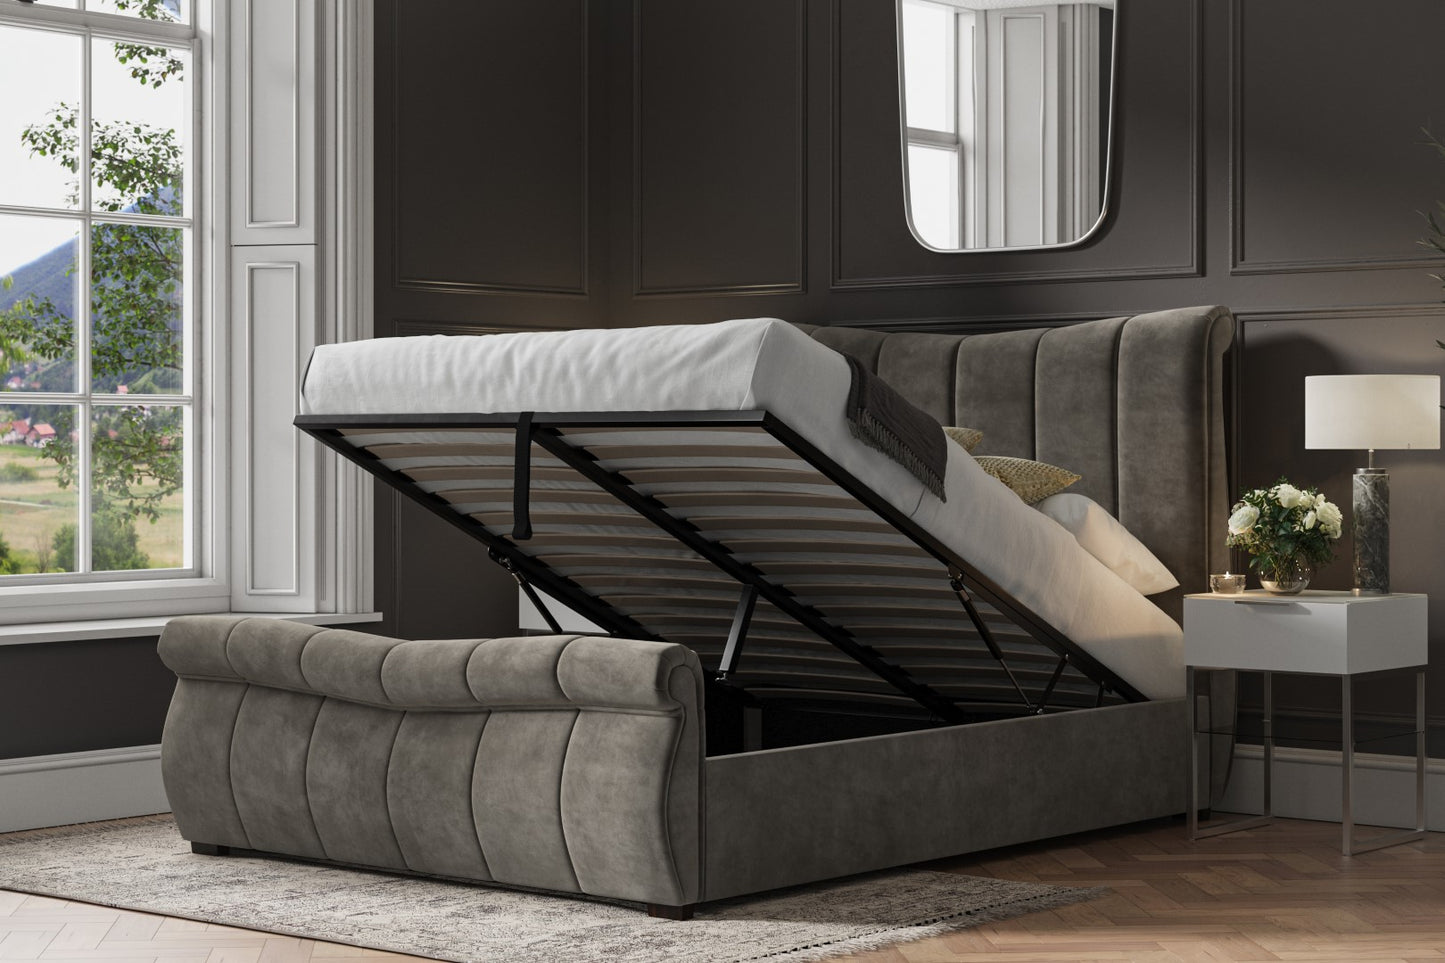 Emporia Beds Bosworth Ottoman Bed